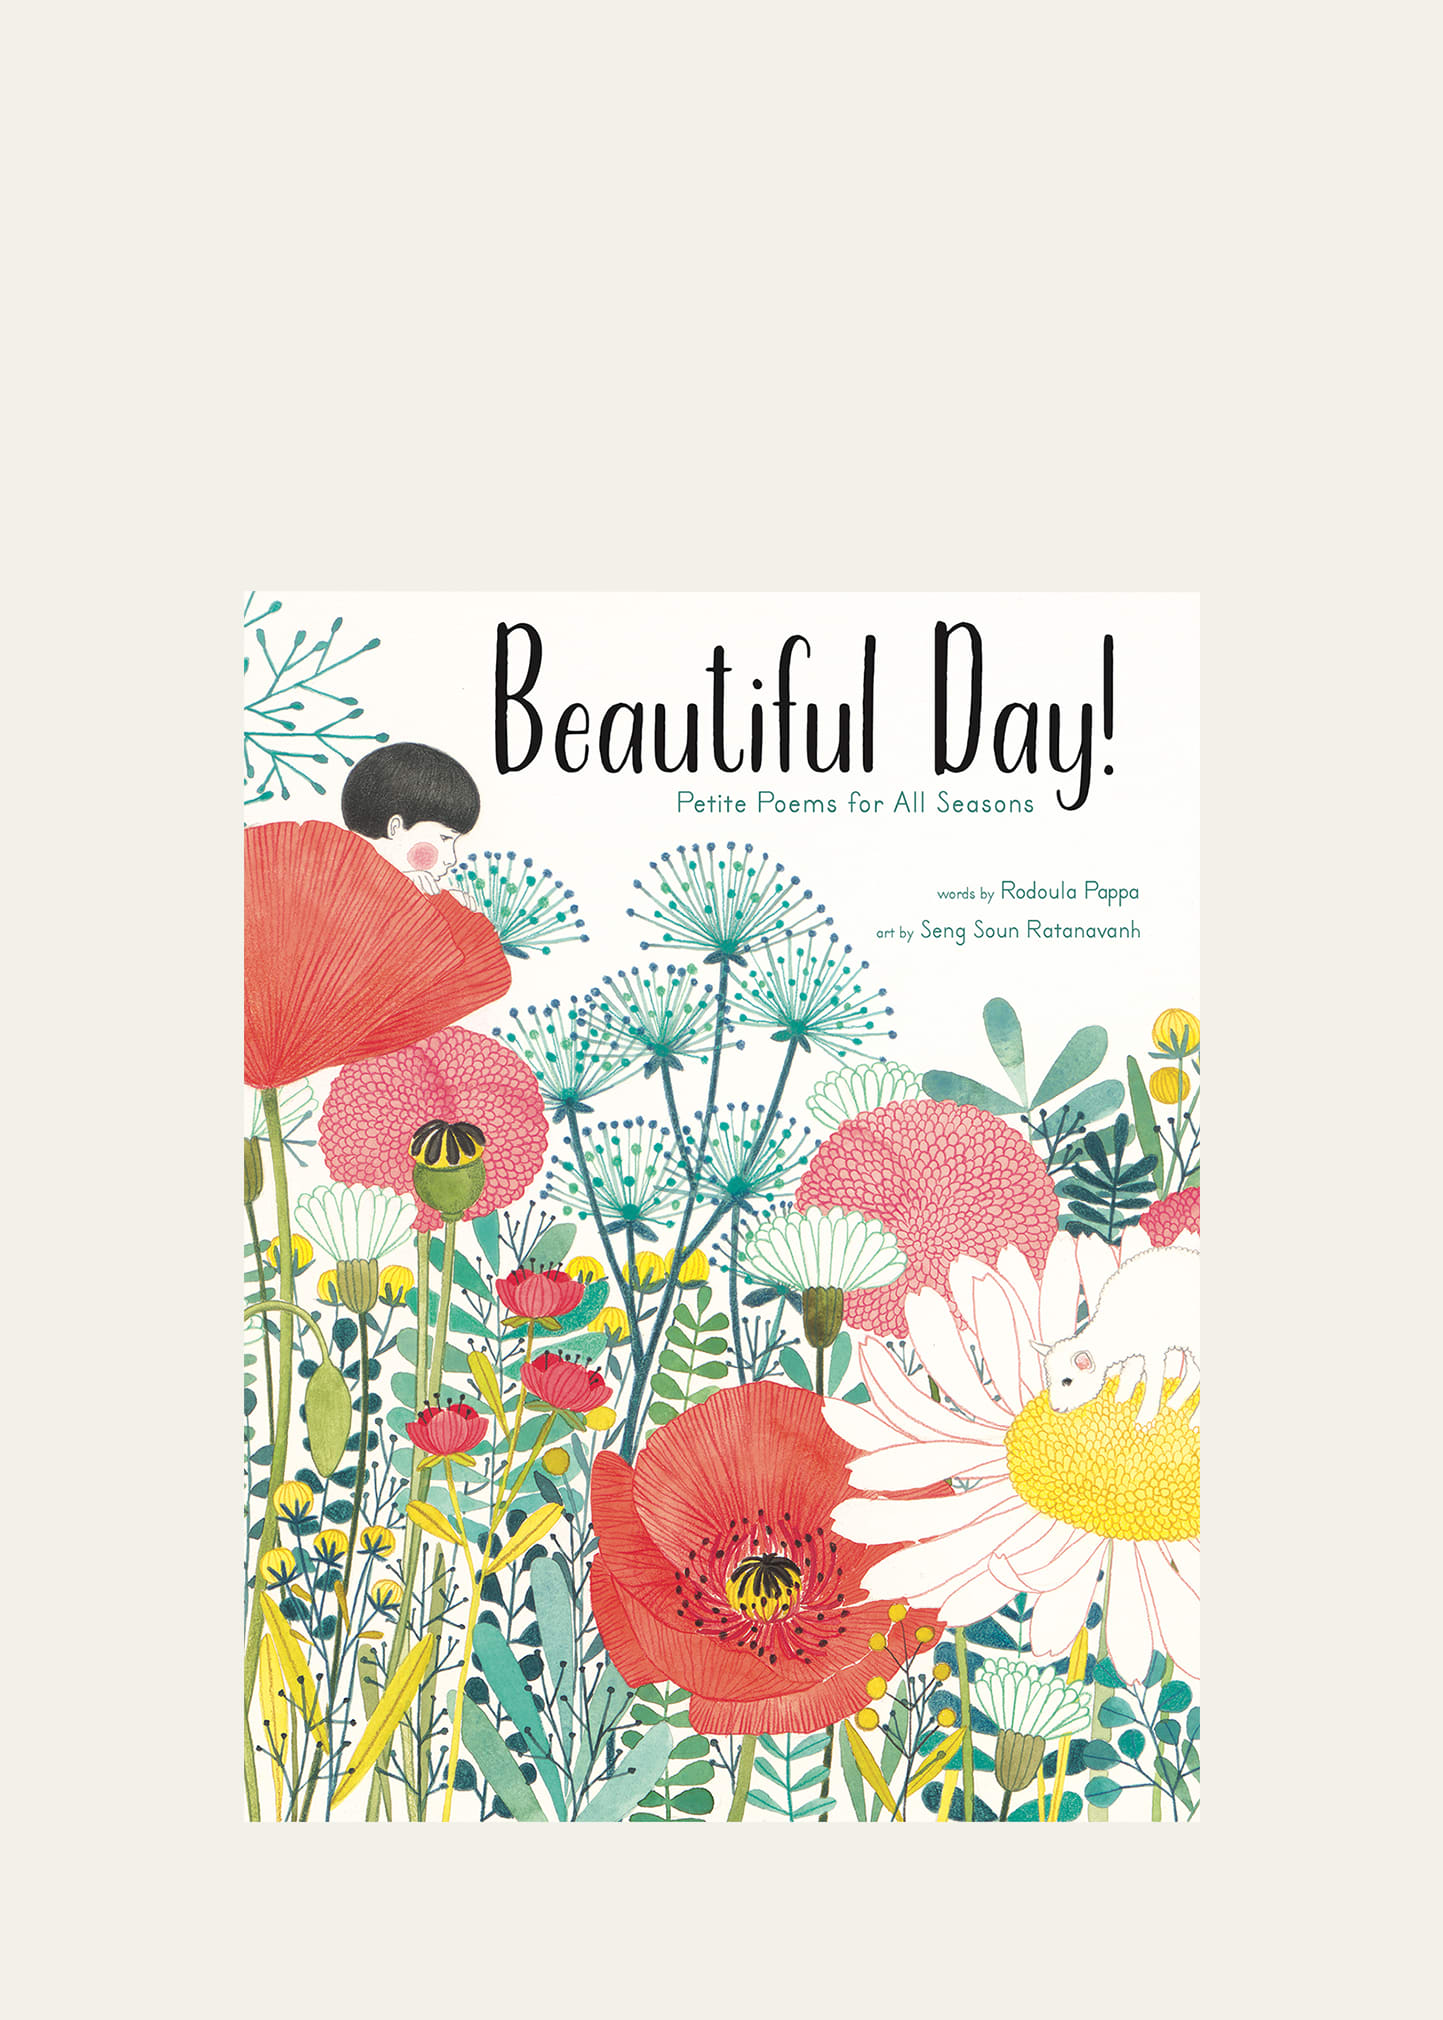 "Beautiful Day! Petite Poems for All Seasons" Book by Rodoula Pappa